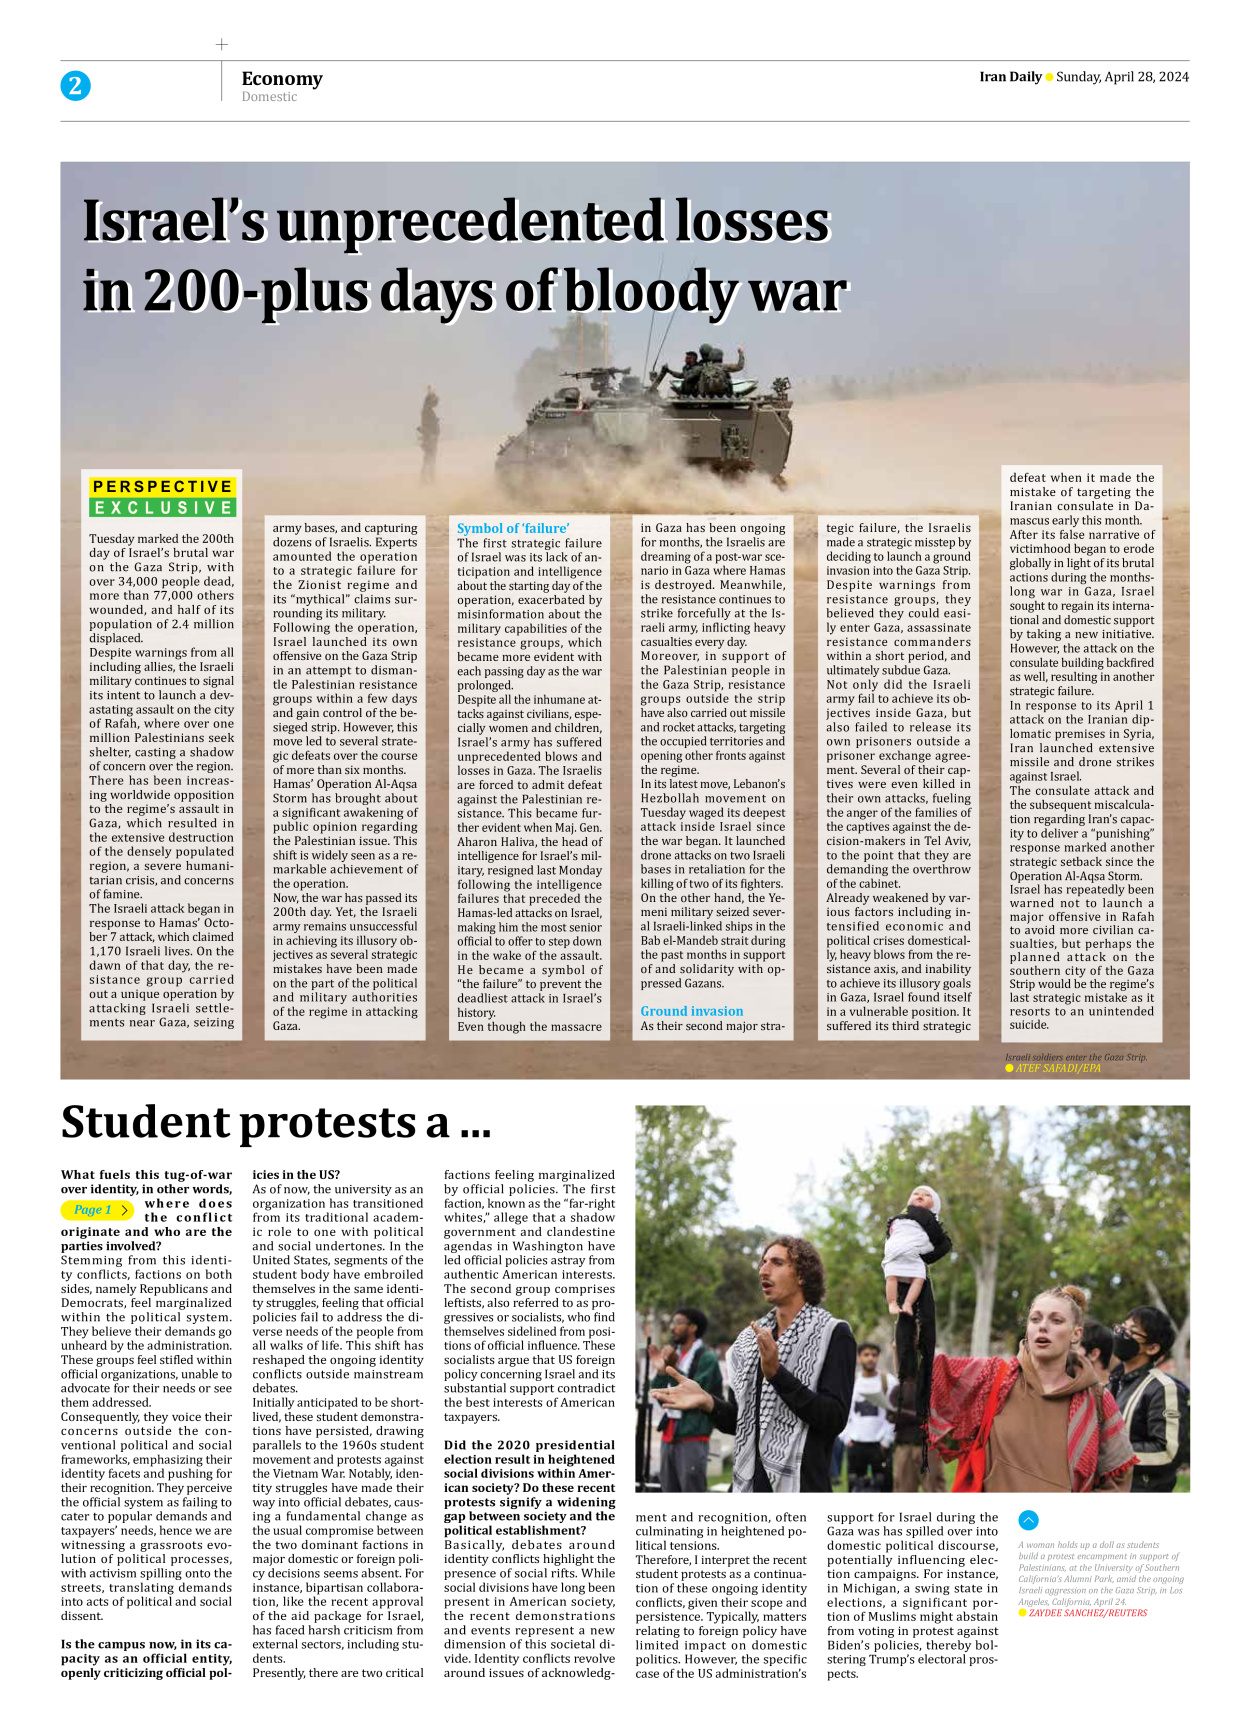 Iran Daily - Number Seven Thousand Five Hundred and Forty Four - 28 April 2024 - Page 2